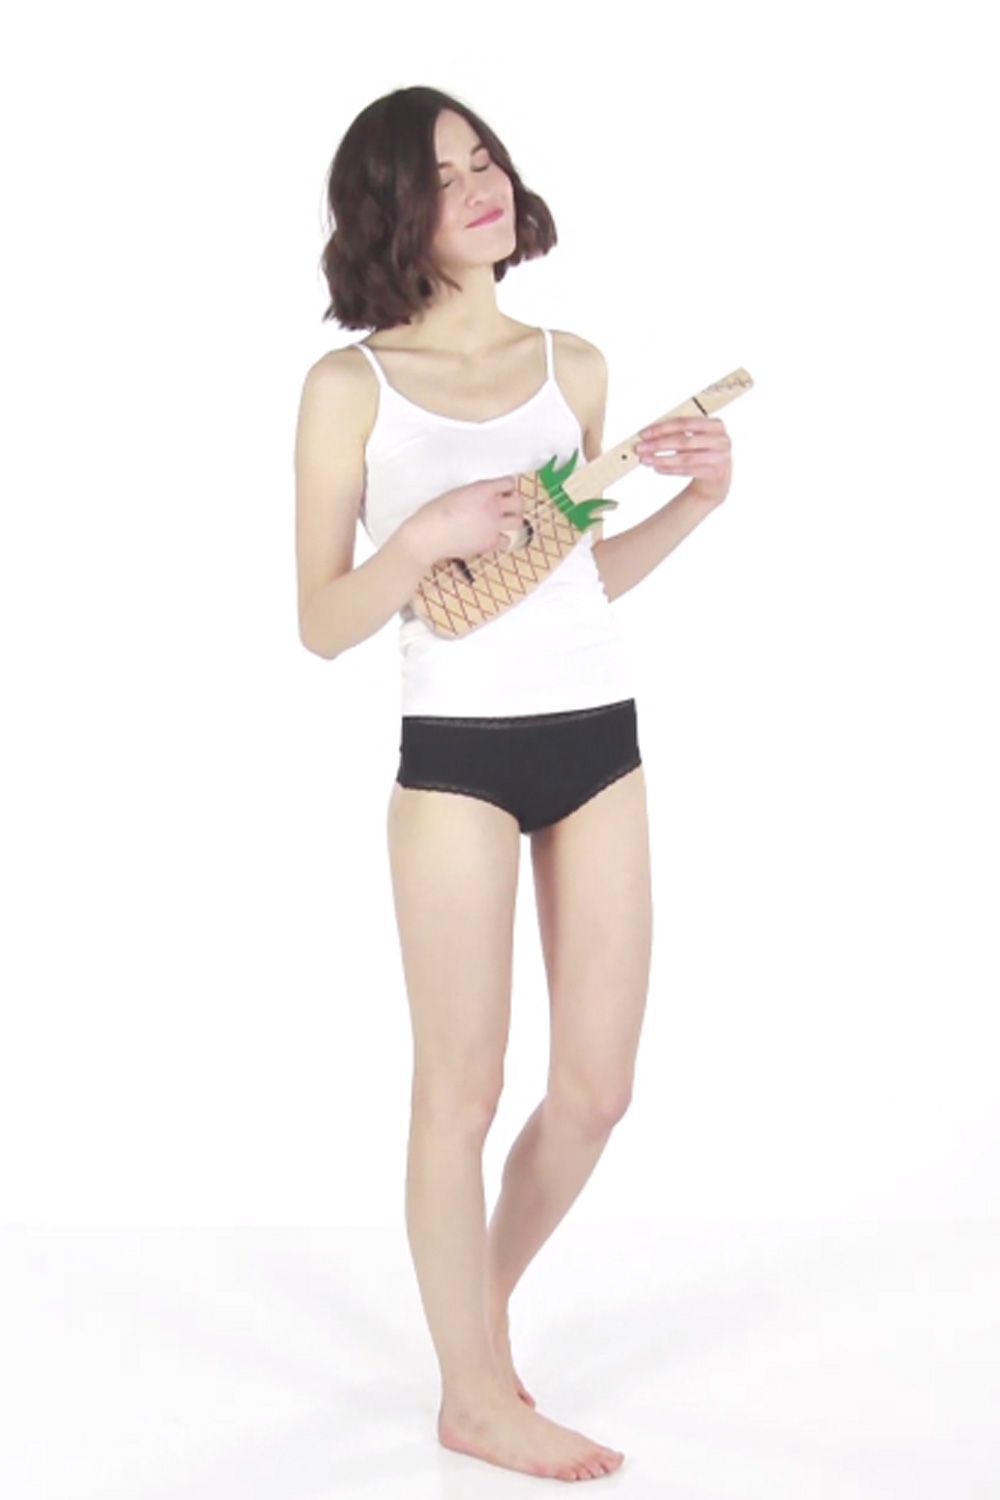 These Women Have Invented Period-Proof Underwear, And The Results Are  Pretty Amazing